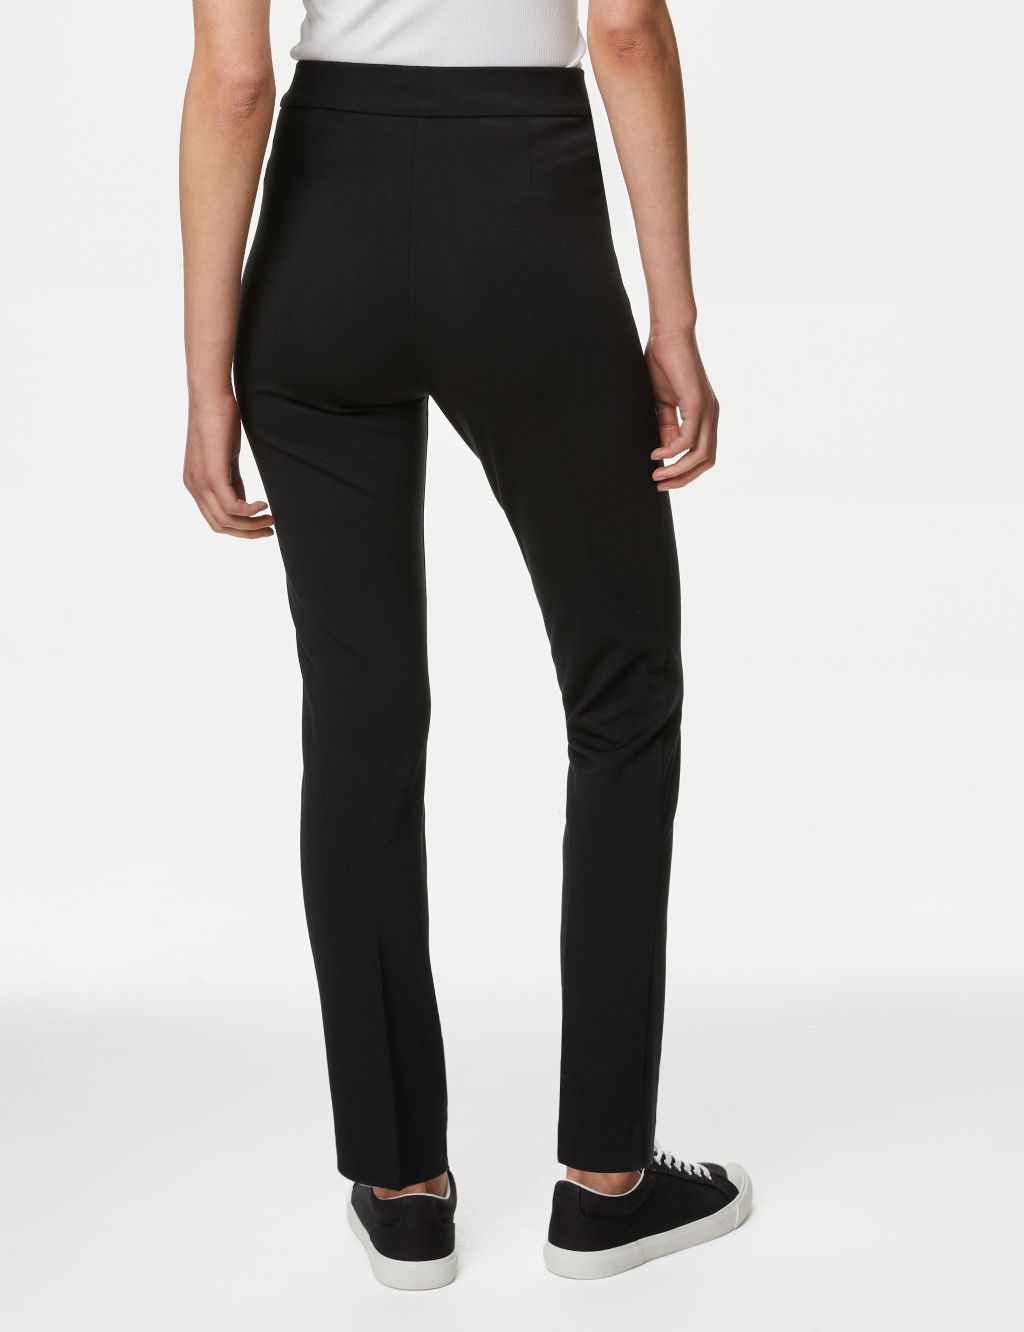 Jersey Slim Fit Ankle Grazer Trousers  image 5